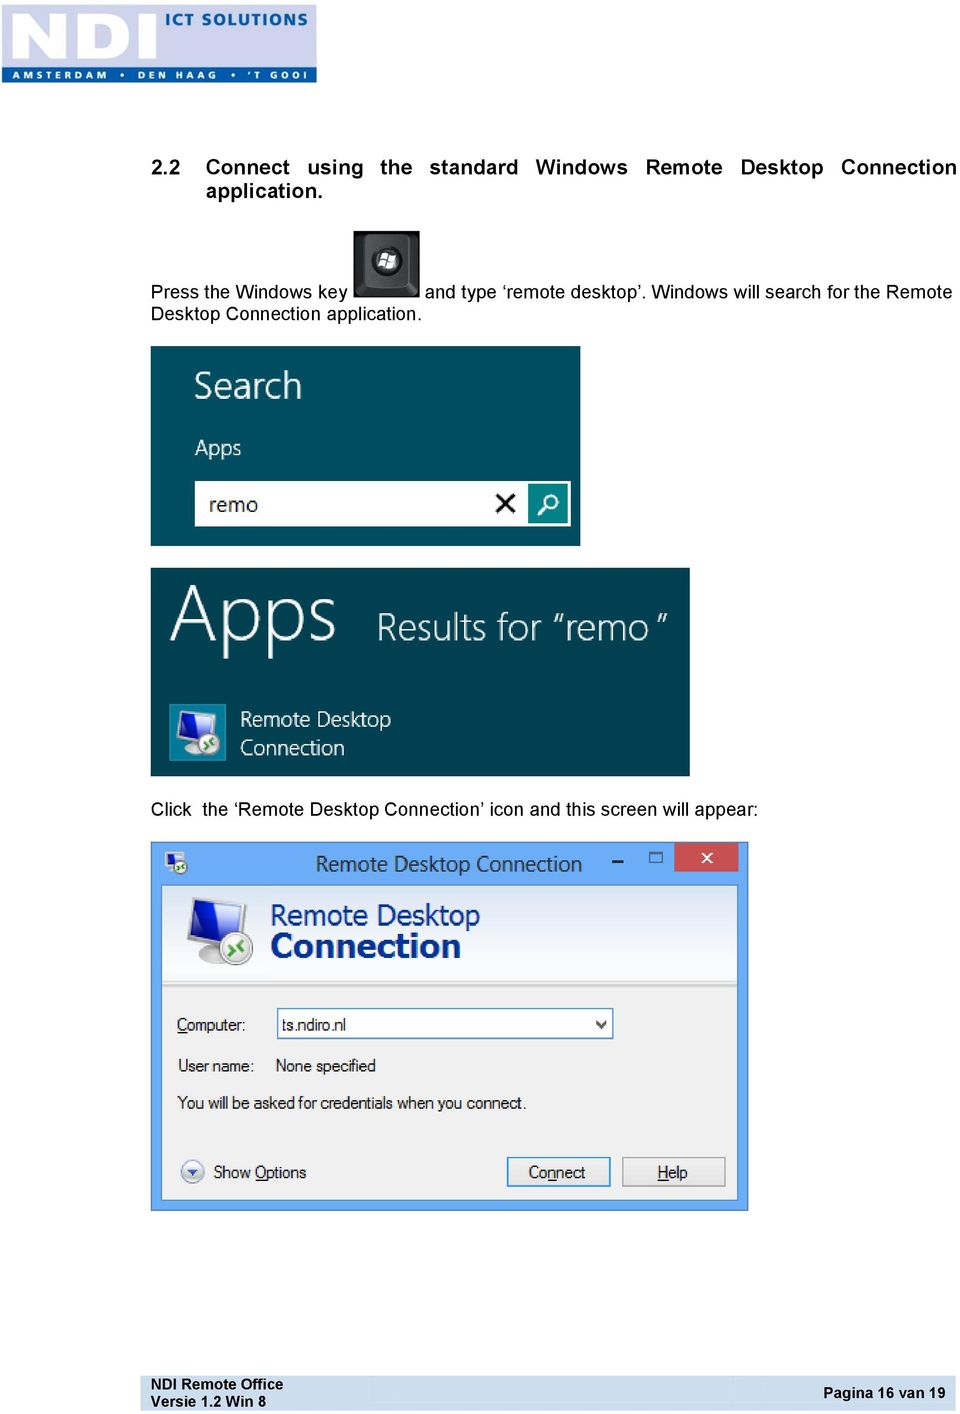 Windows will search for the Remote Desktop Connection application.